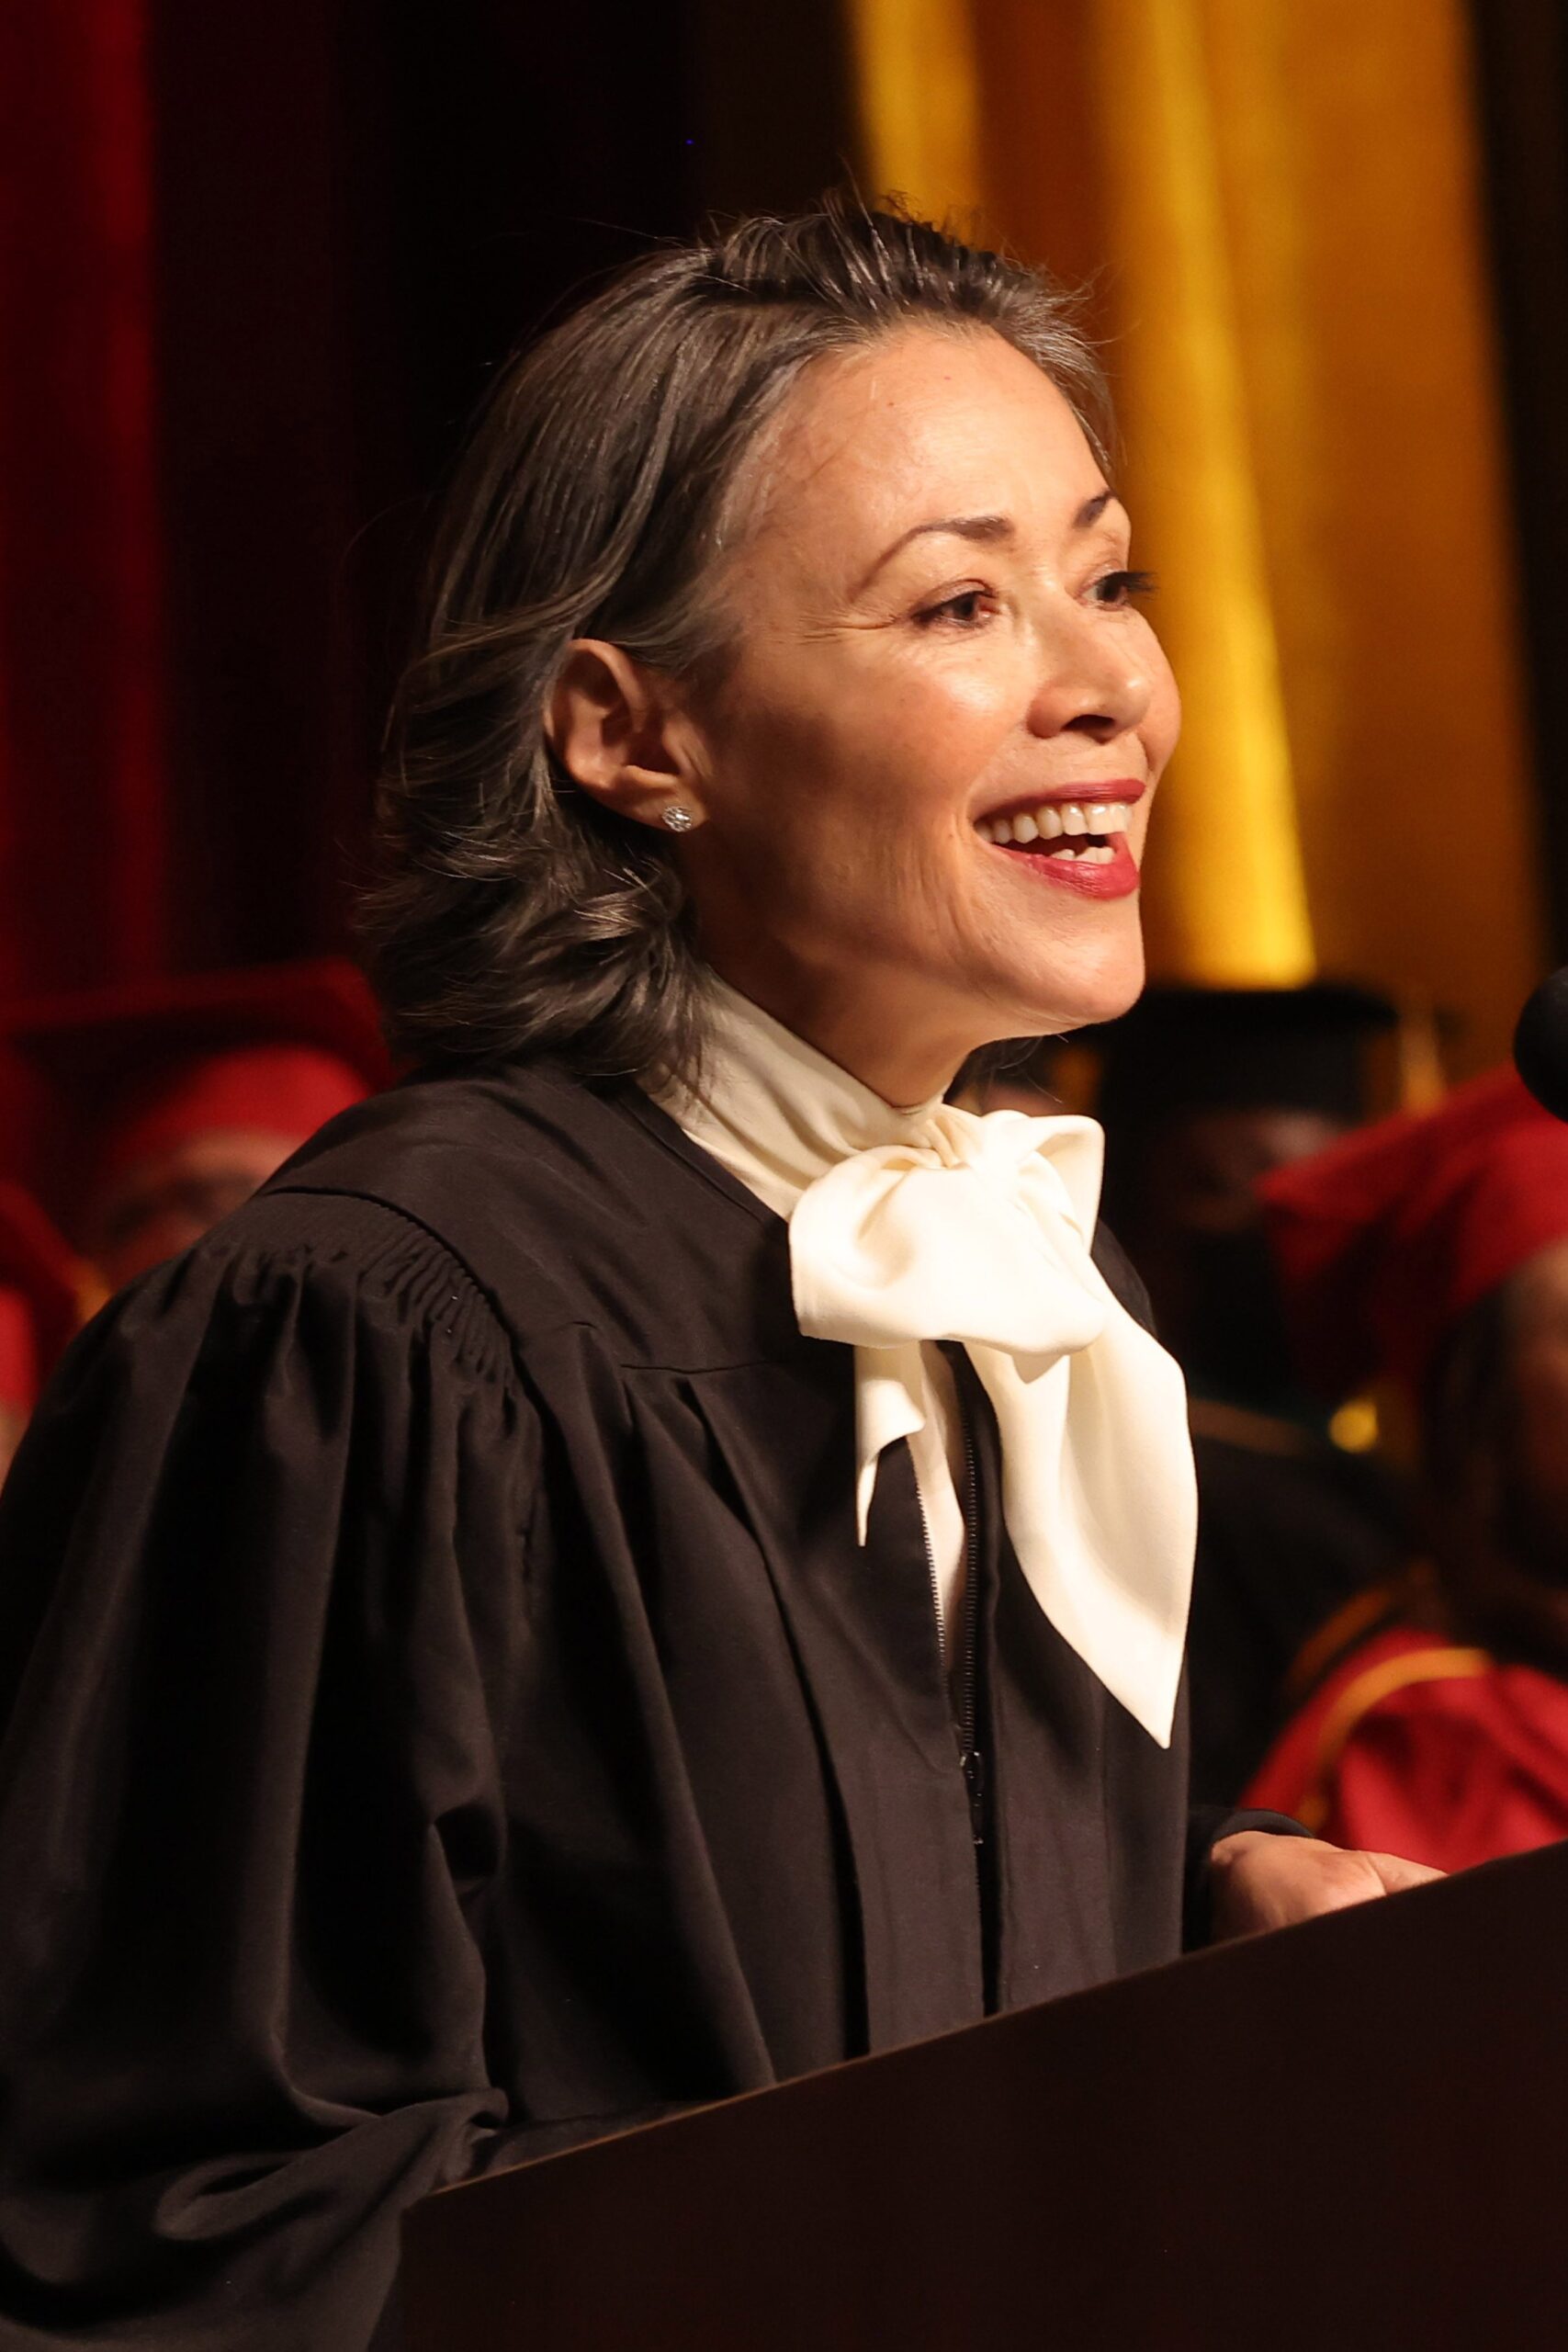 Award-winning journalist, Ann Curry delivered the commencement speech at the Galen Center. (Photo Steve Cohn)